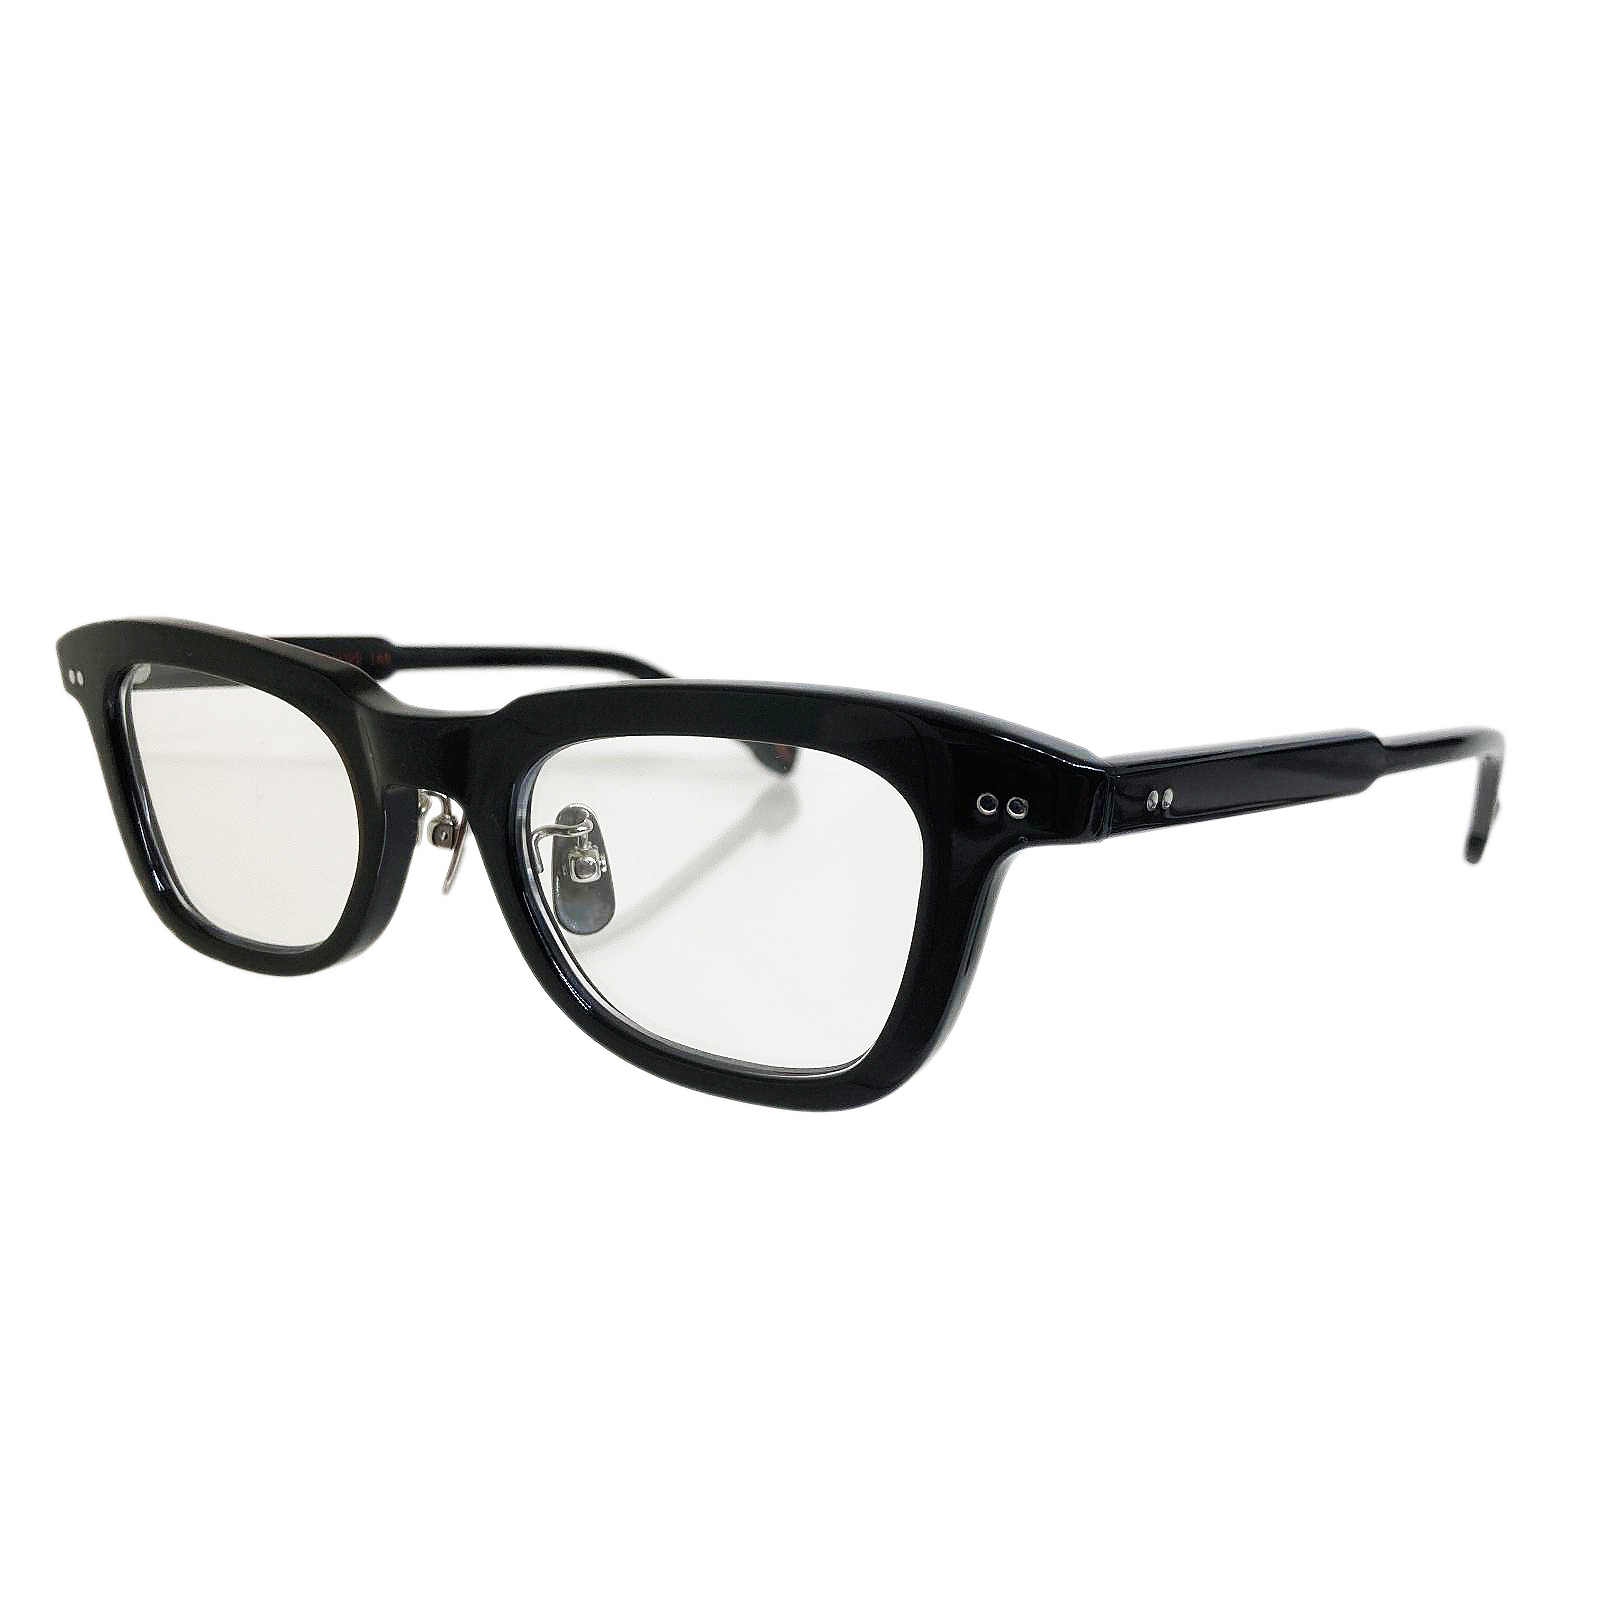 corner コーナー Modern W.F モダン W.F Col.1 Record Black / Clear 2curved Lenses スクエアタイプ 正規取扱店